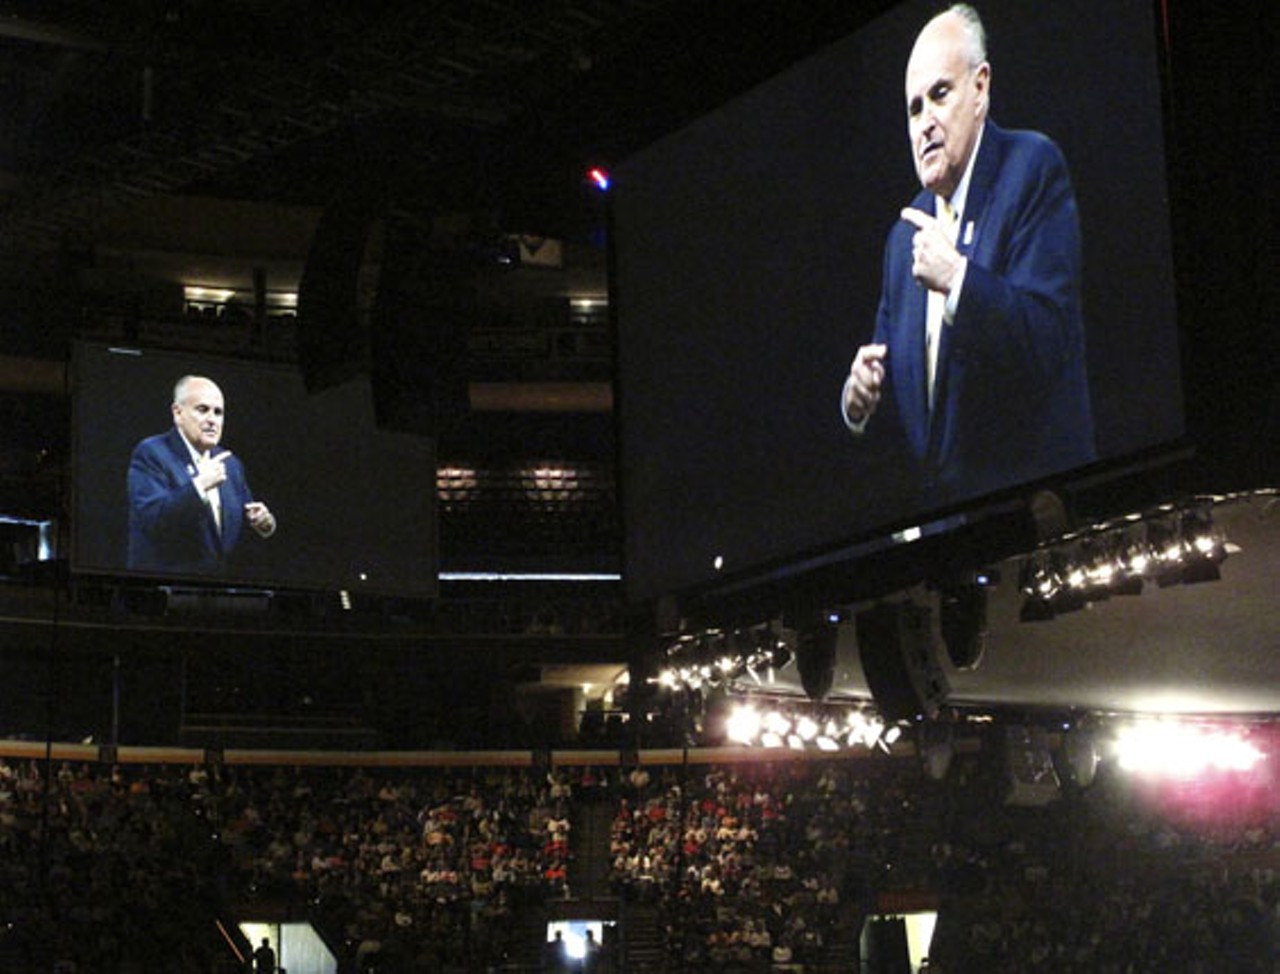 Citing his use of the Compstat program to reduce crime, Giuliani urged attendees to "become conversant with the computer and use it a lot."